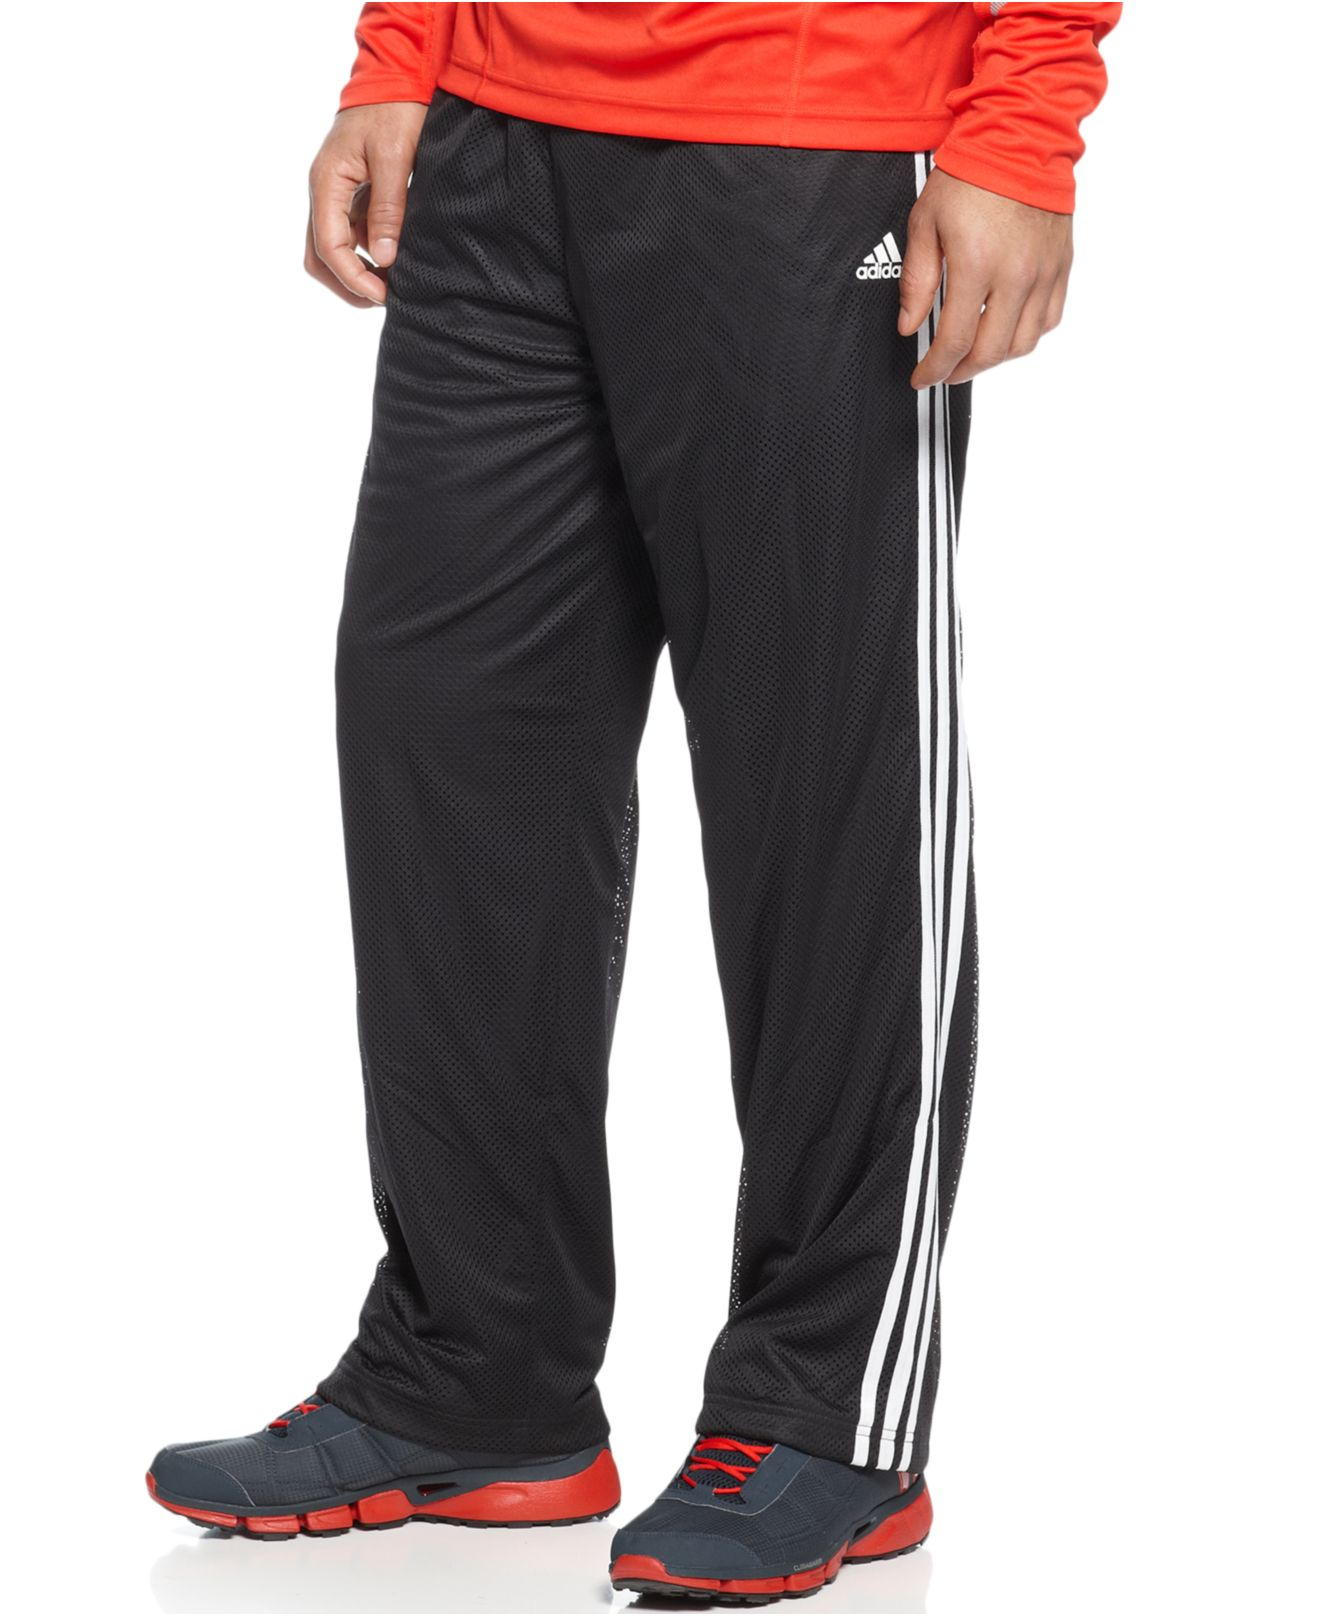 adidas Double Up 2.0 Basketball Pants in Black/White (Black) for Men - Lyst